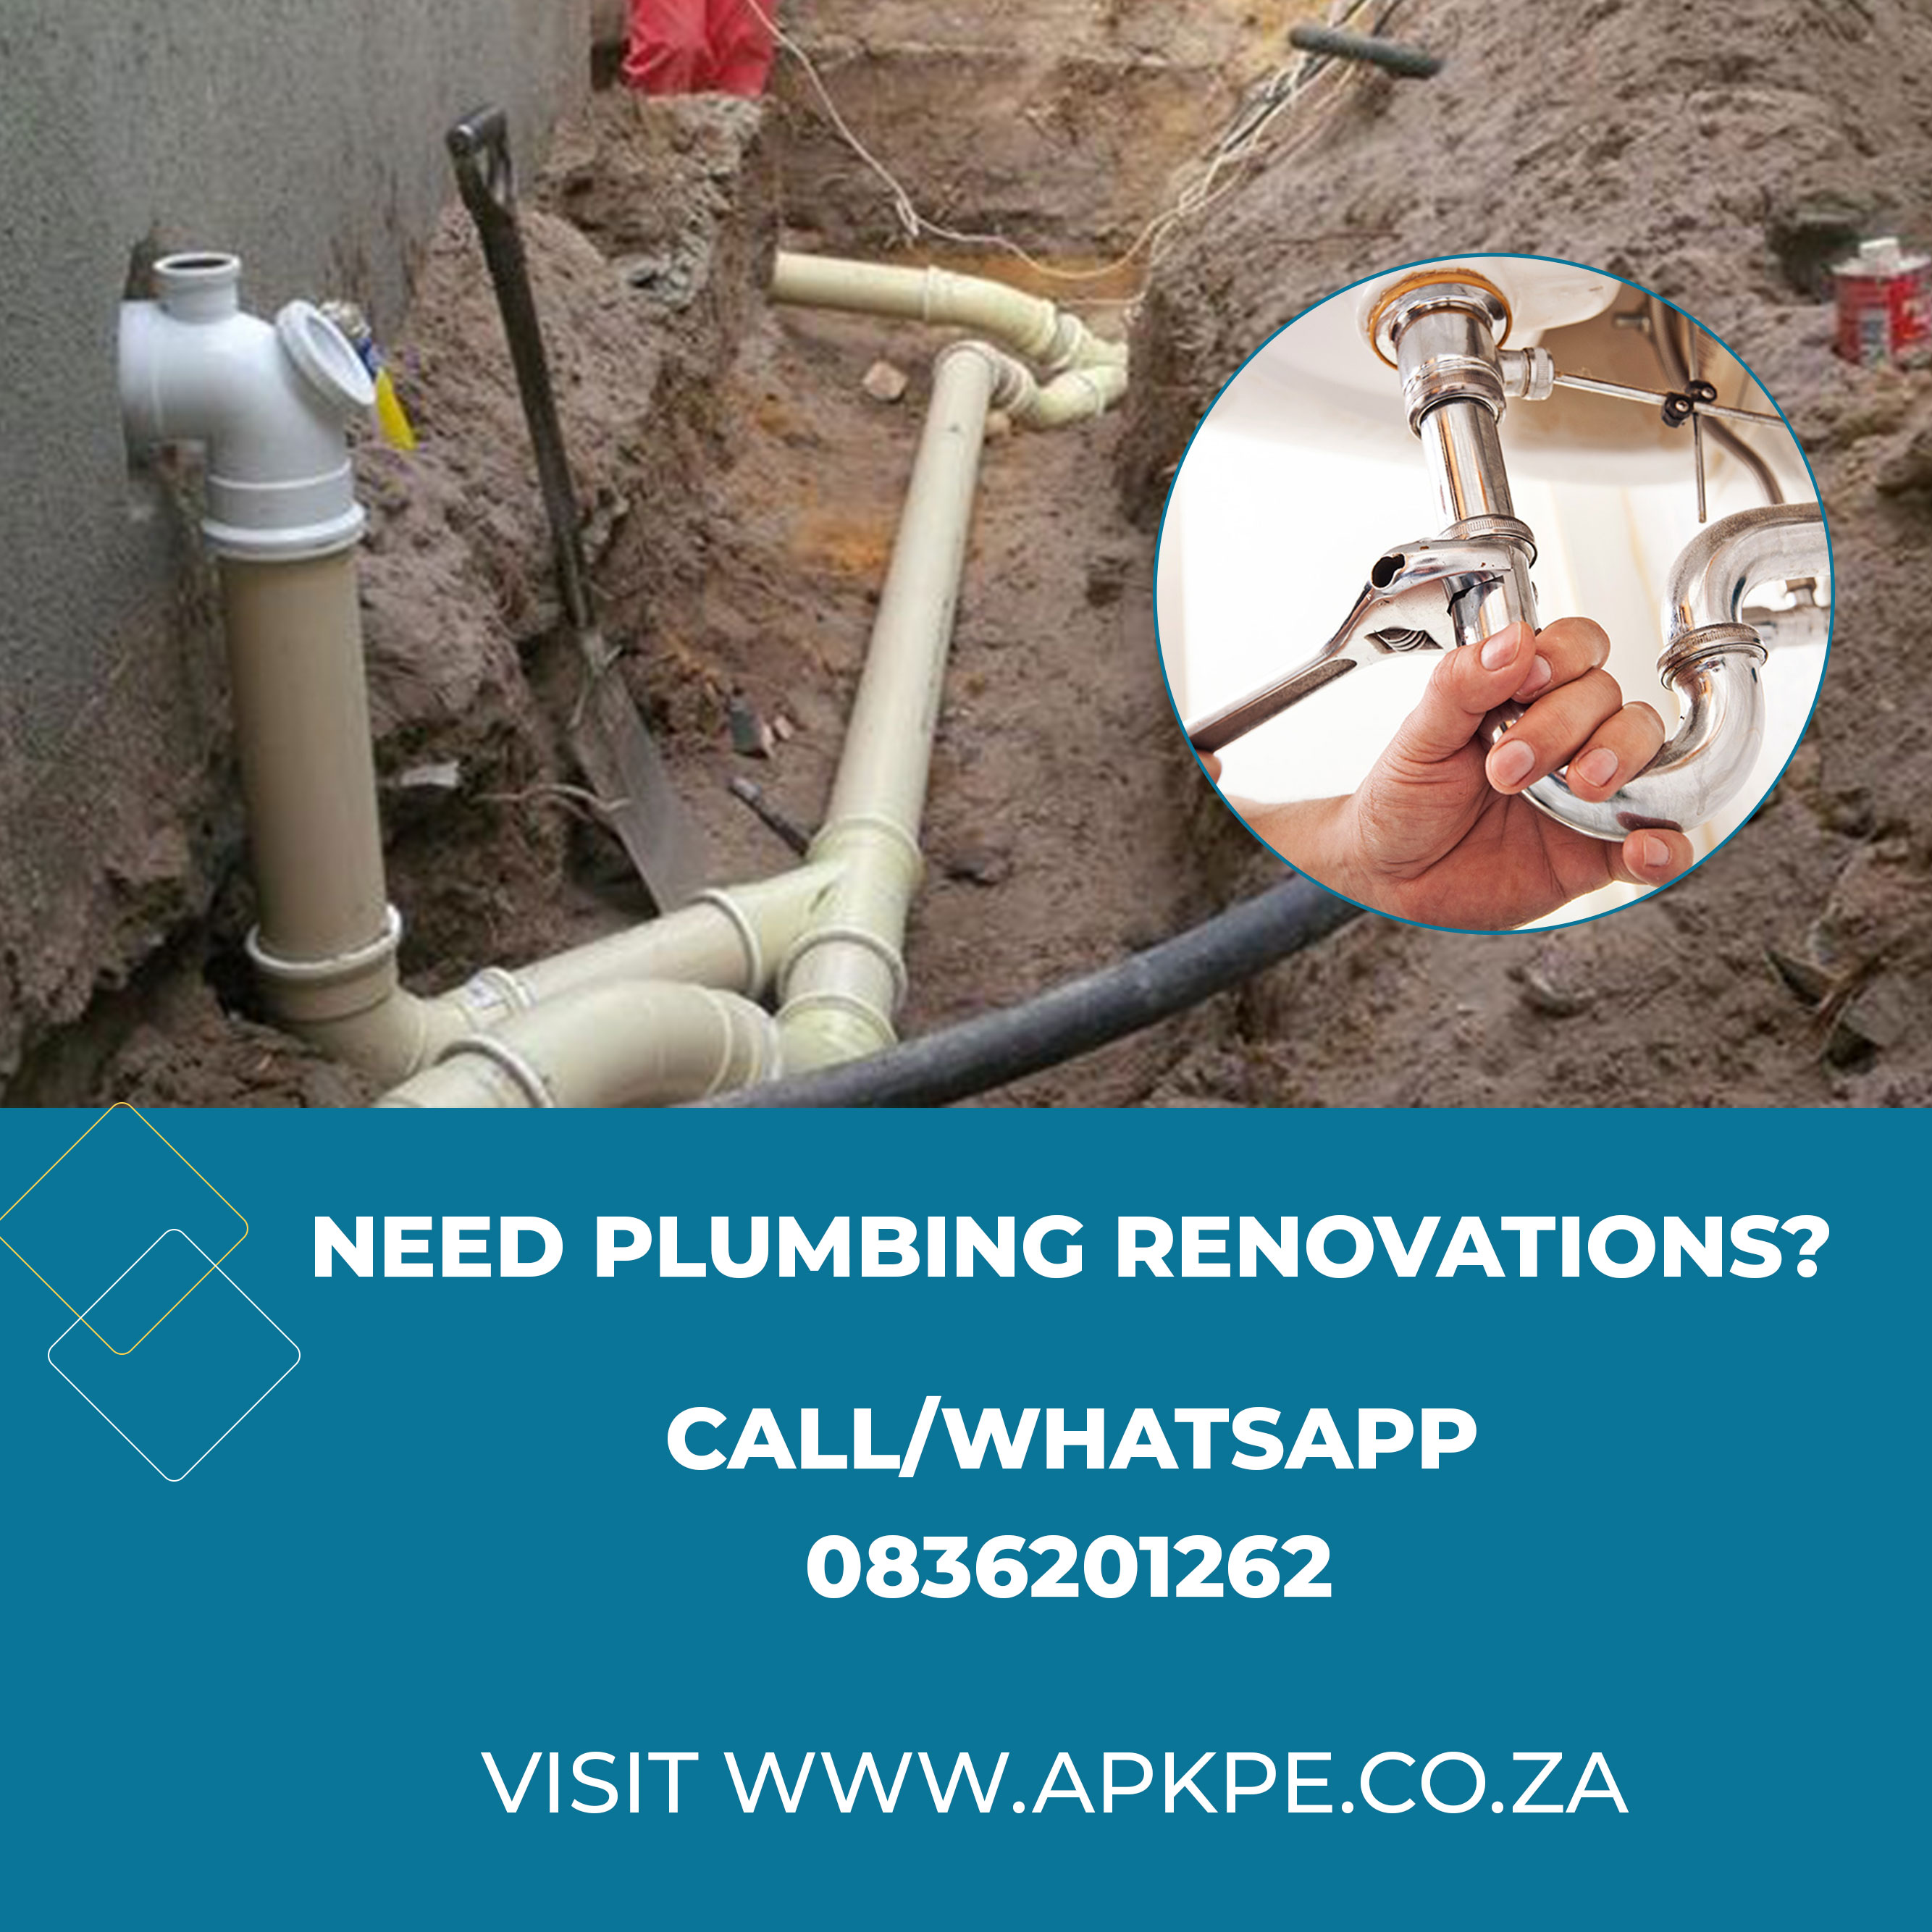 Are you in need of plumbing renovations services? Come to us, we will give you the peace of mind with our incredible plumbing services in Johannesburg. Call/WhatsApp: 083 620 1262 or visit www.apkpe.co.za